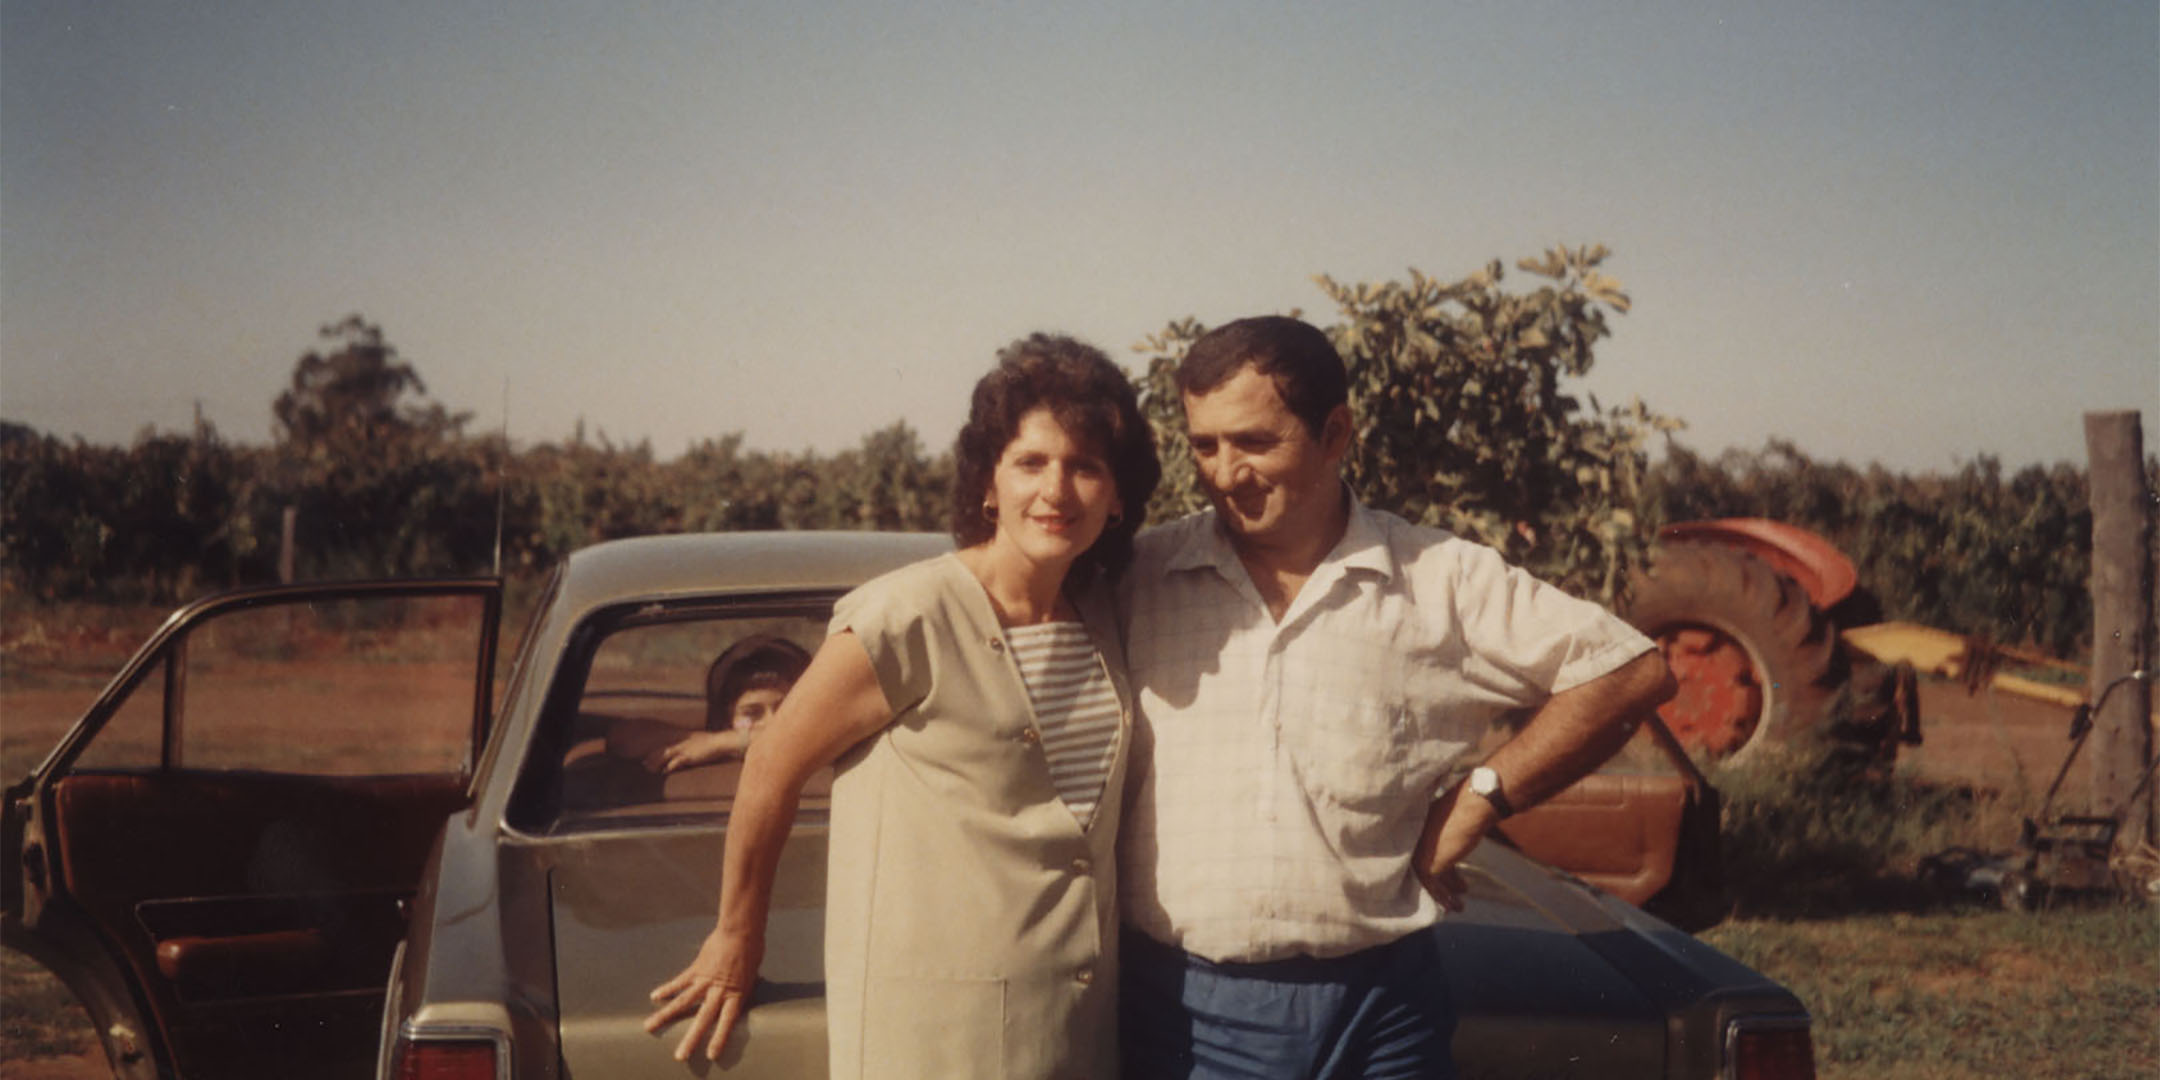 Marie and Michel Nehme at Fairlane Farm, Nehme vineyard, Yenda, 1988. All images reproduced courtesy Julie Nehme